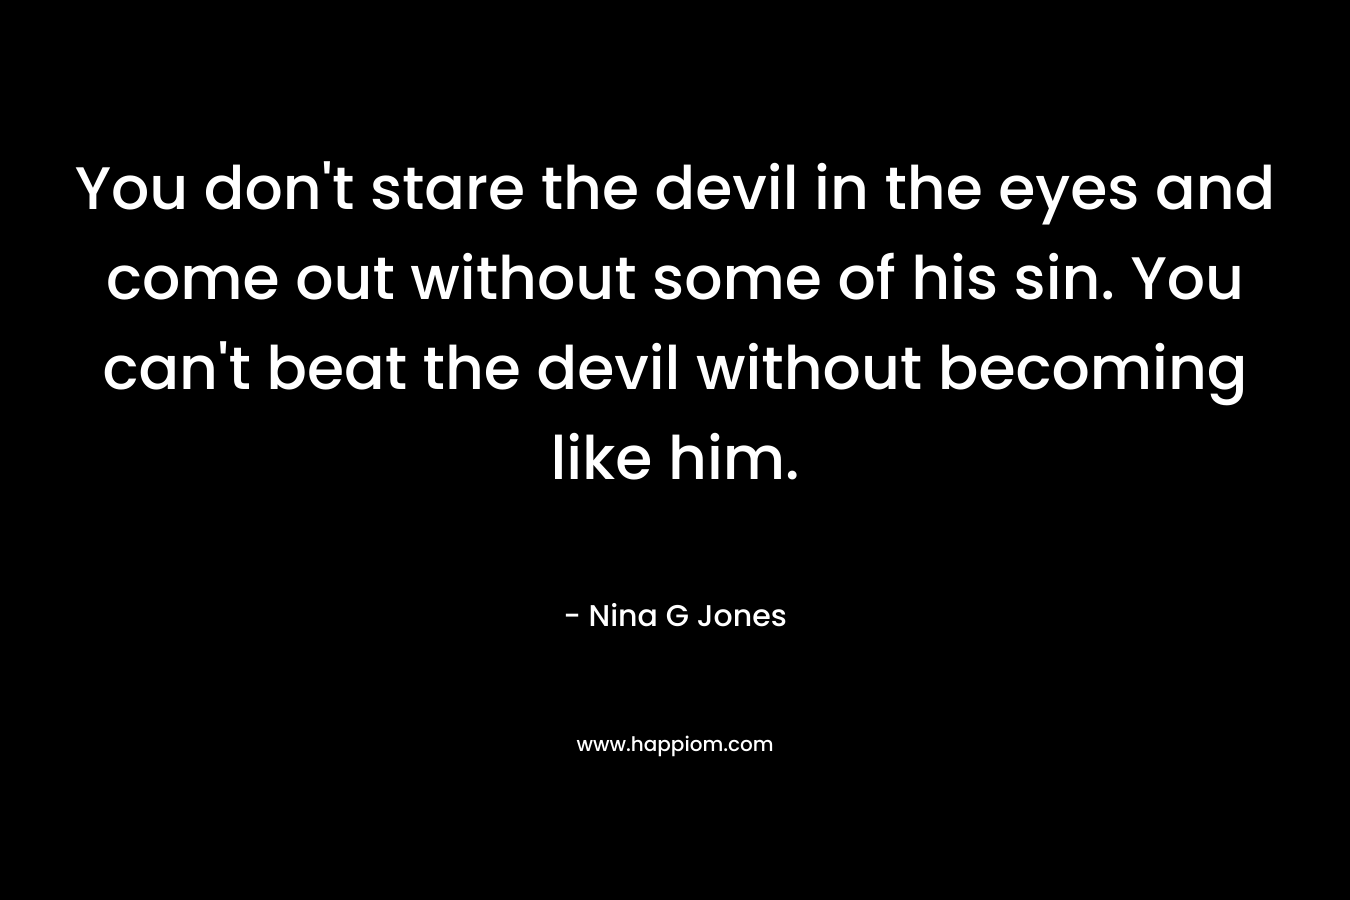 You don't stare the devil in the eyes and come out without some of his sin. You can't beat the devil without becoming like him.